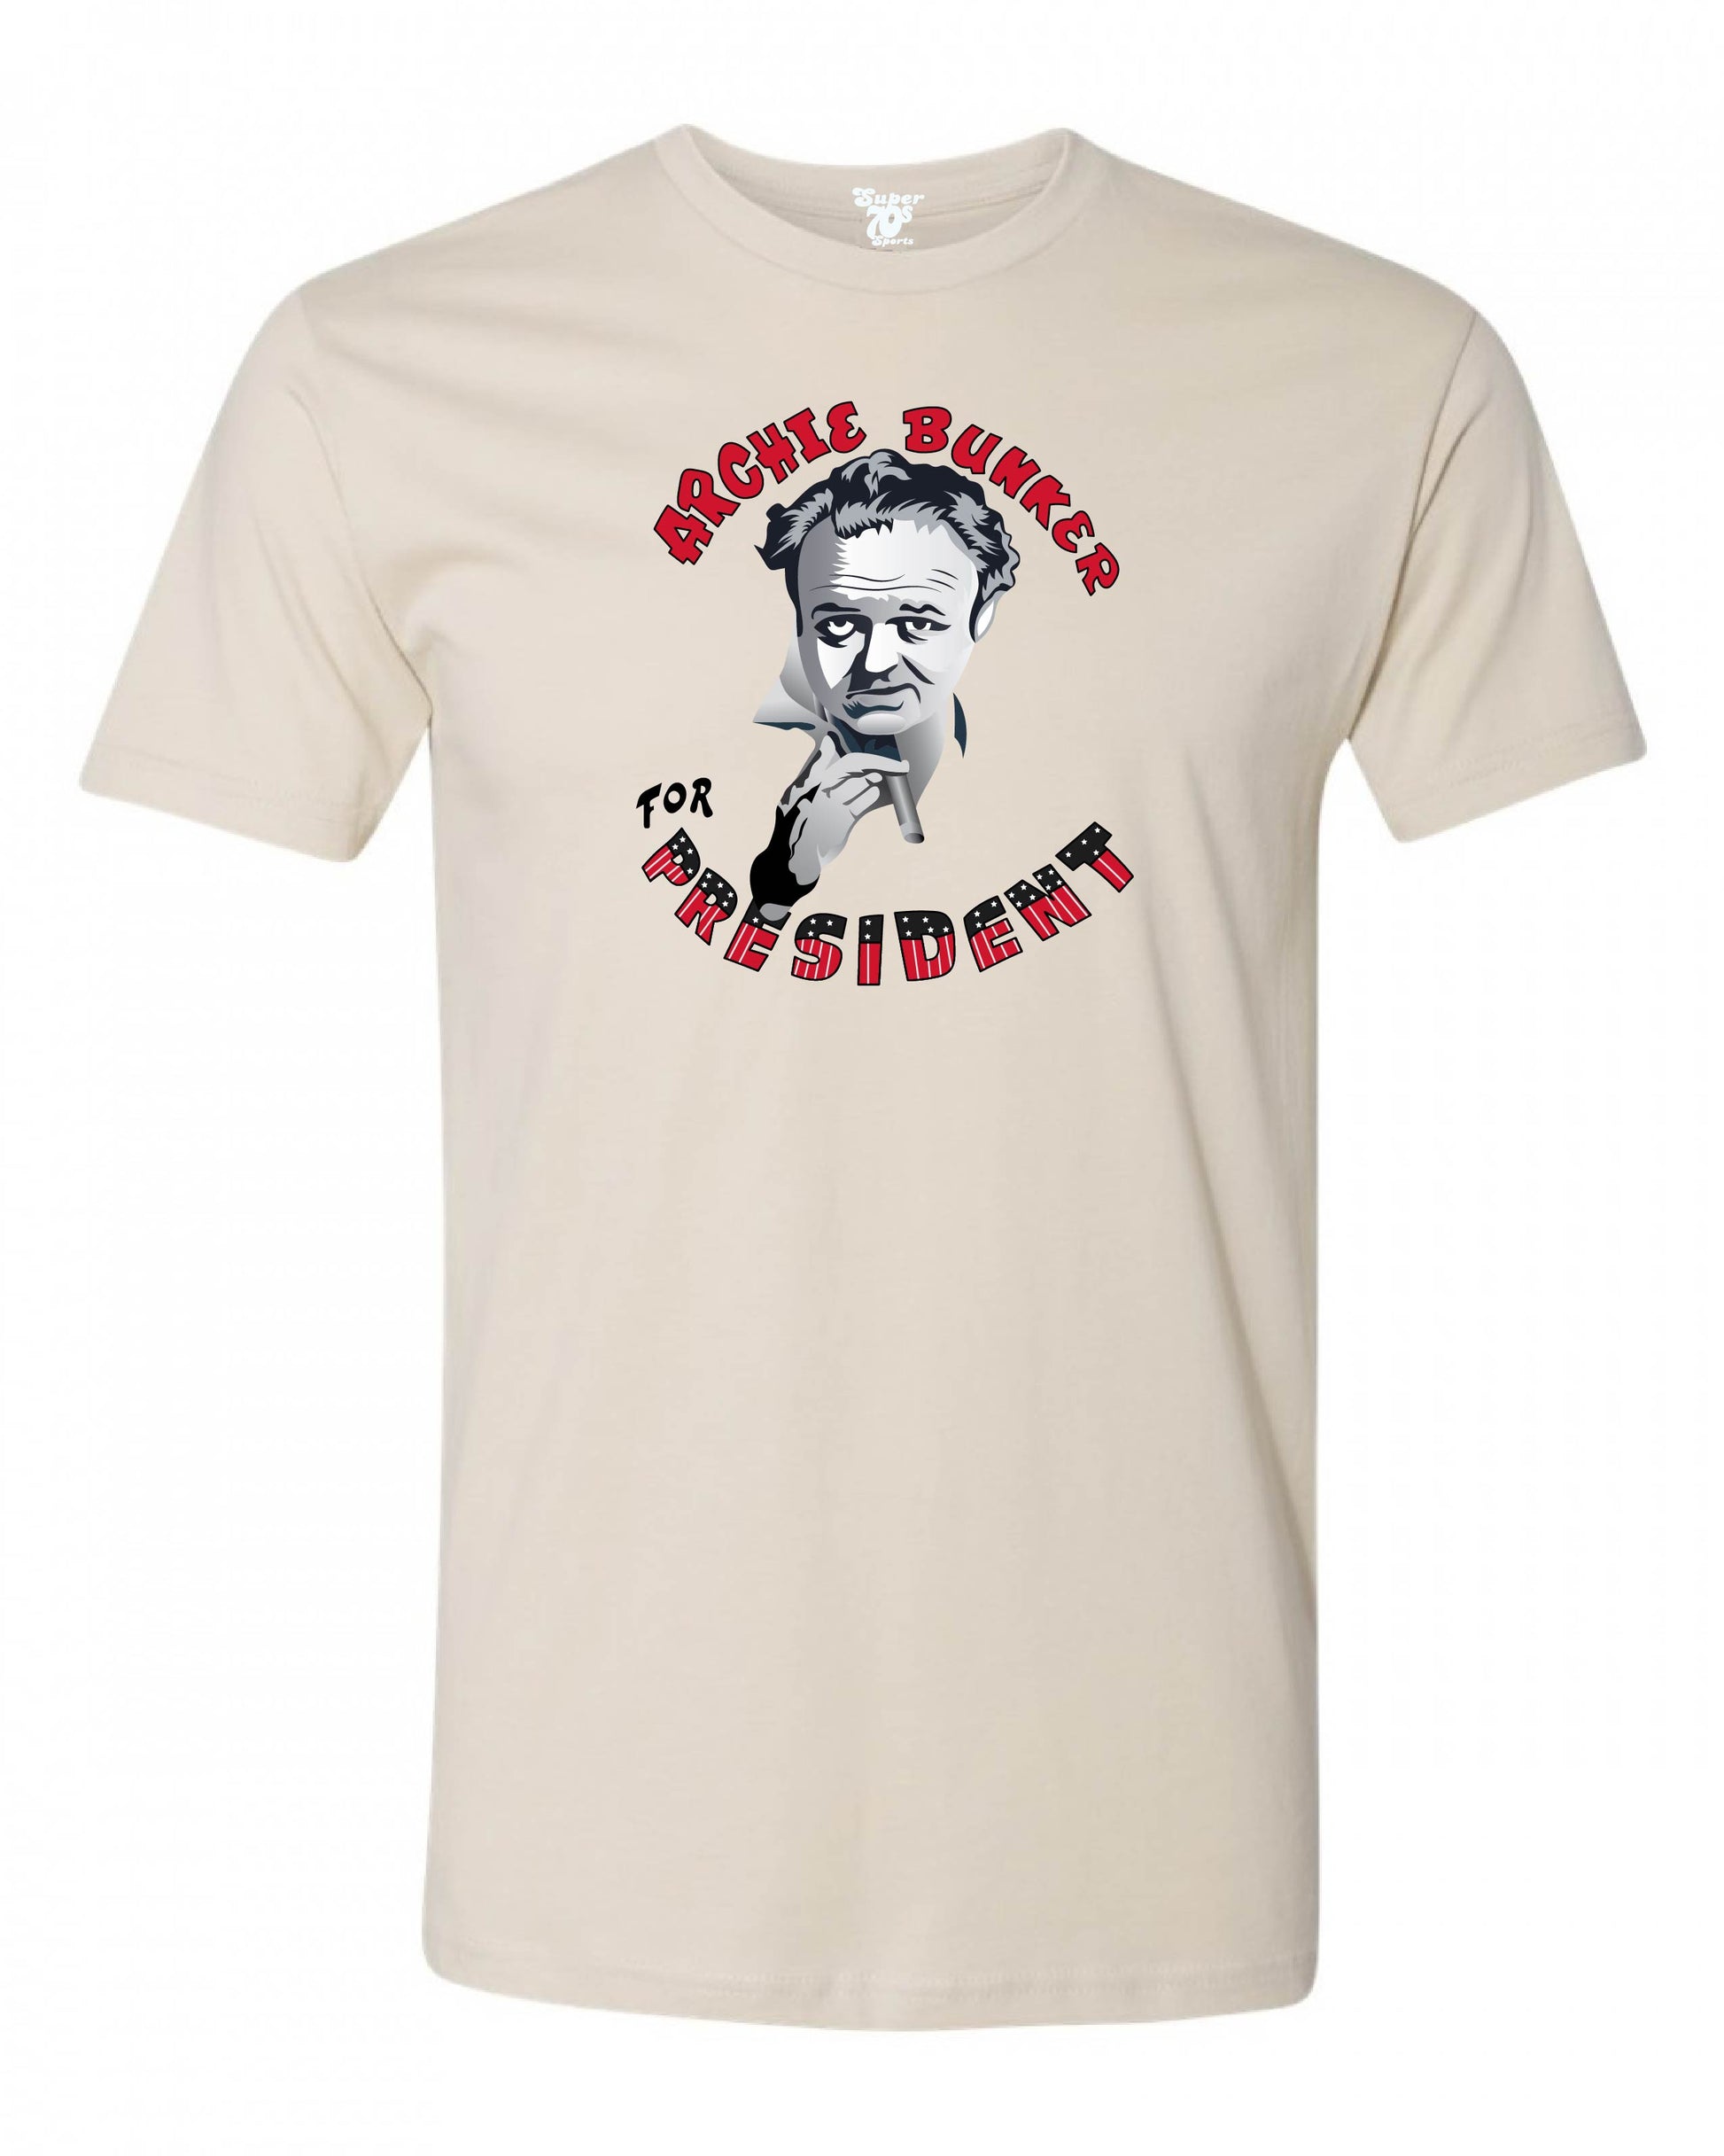 Archie Bunker for President Tee – Super 70s Sports